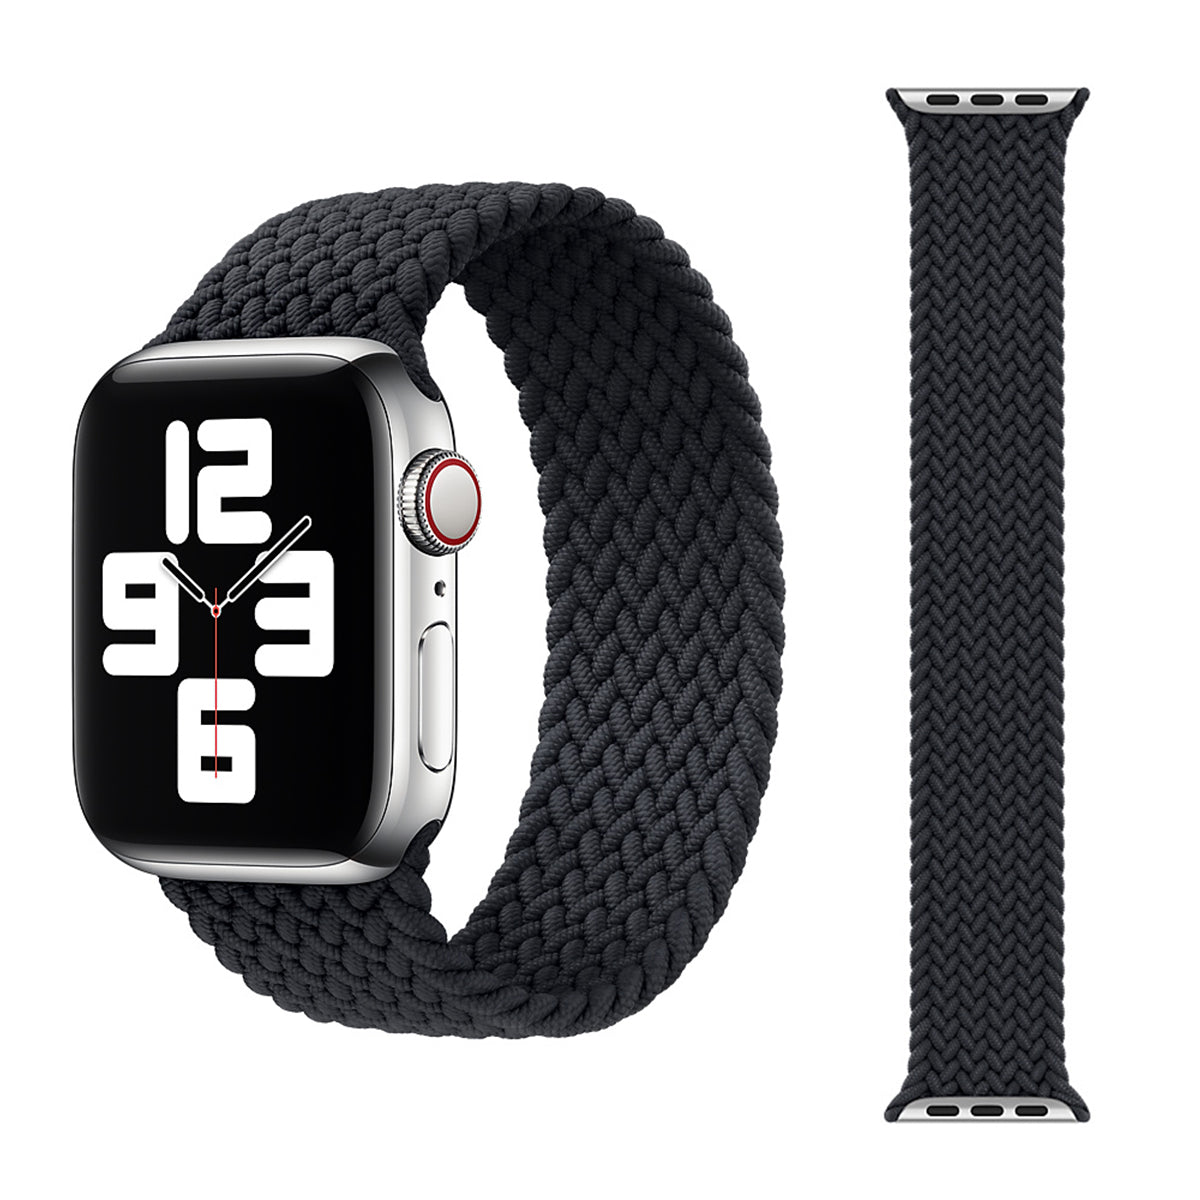 Apple Watch Solo Loop Band Review! The Most Comfortable Band! - YouTube